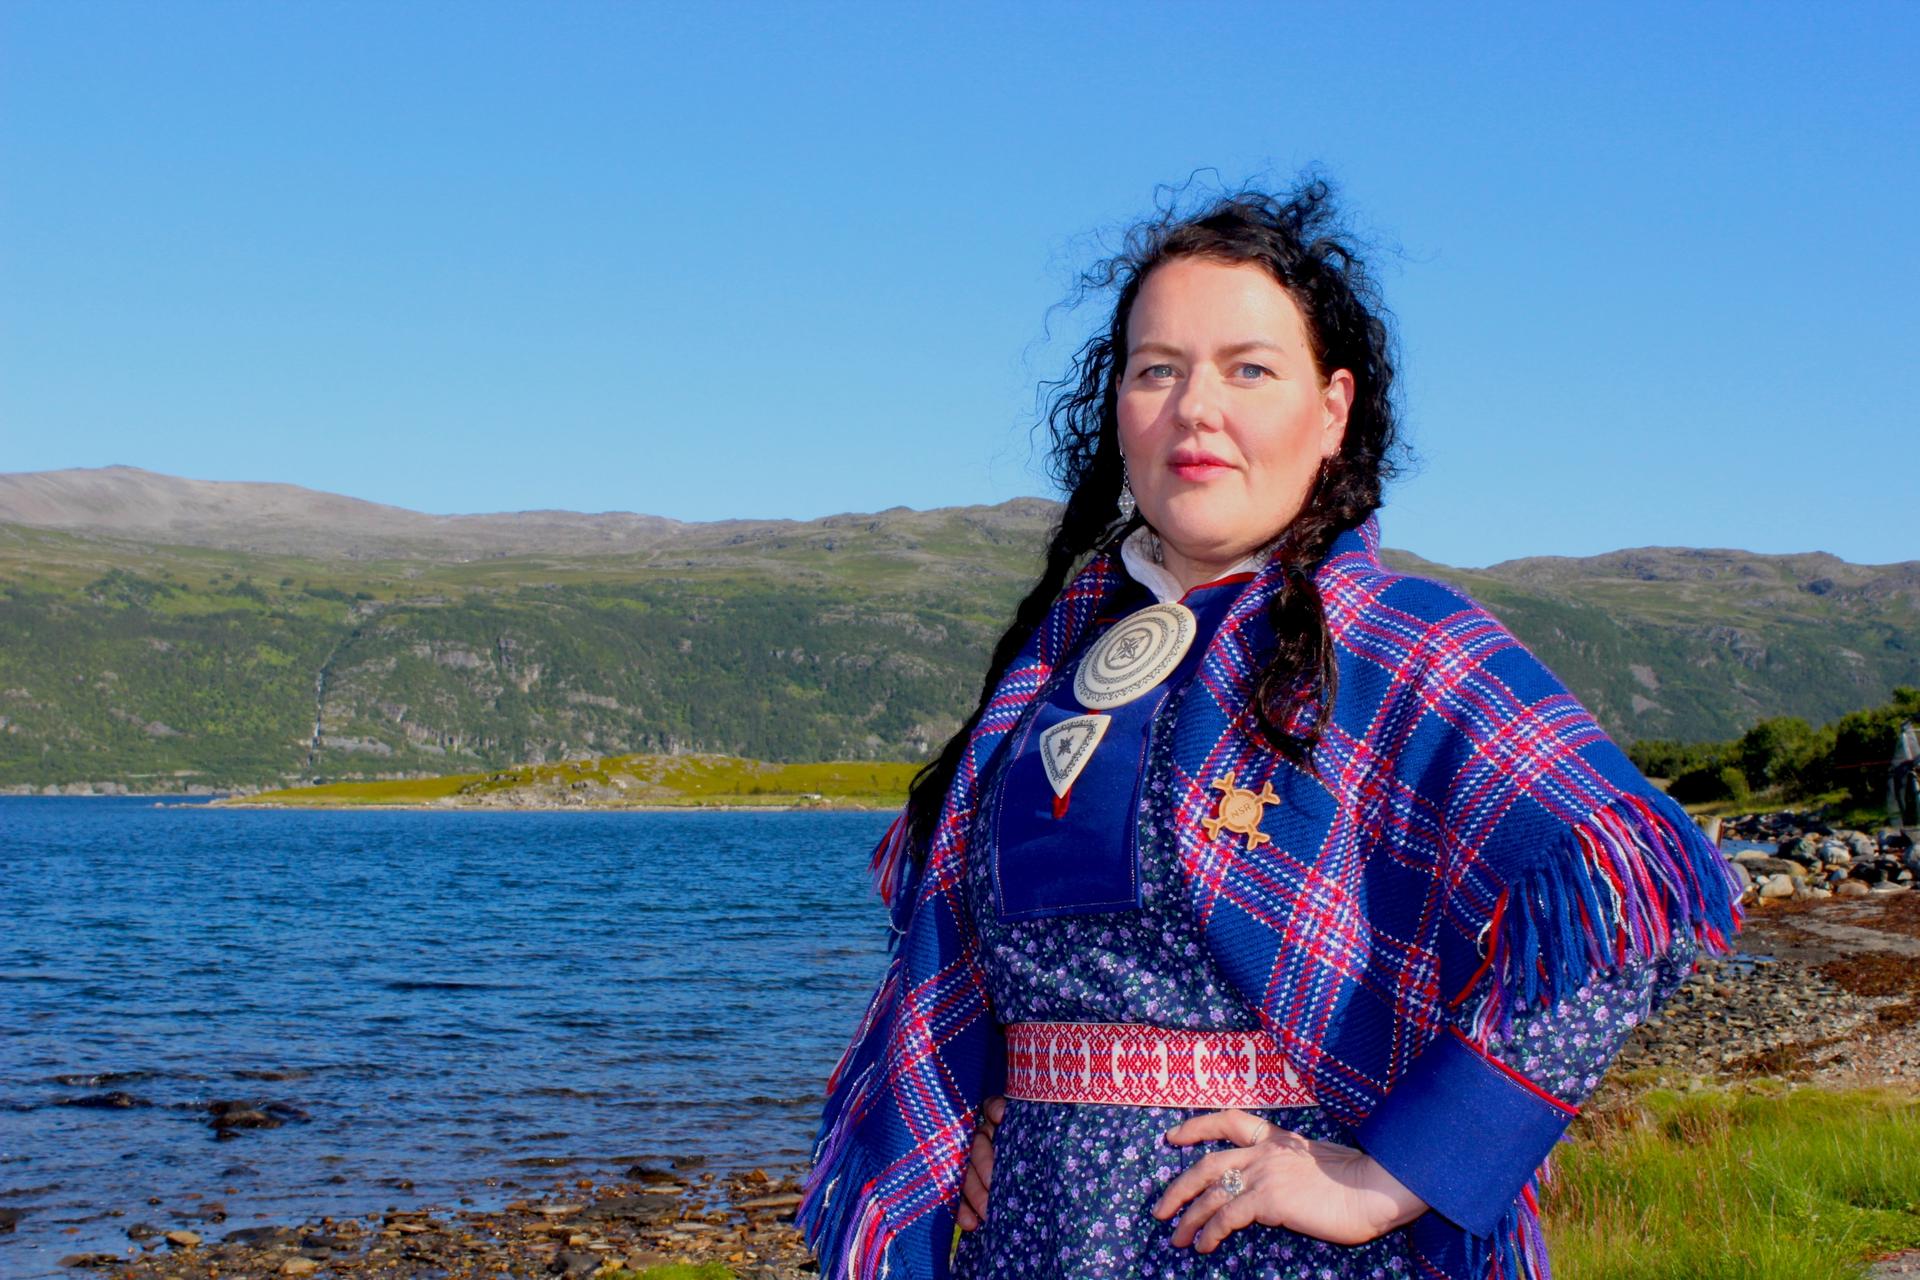 Saami Parliament President Silje Karine Muotka stands by the Repparfjord in the Norwegian Arctic, where protesters have blocked construction on a planned copper mine.